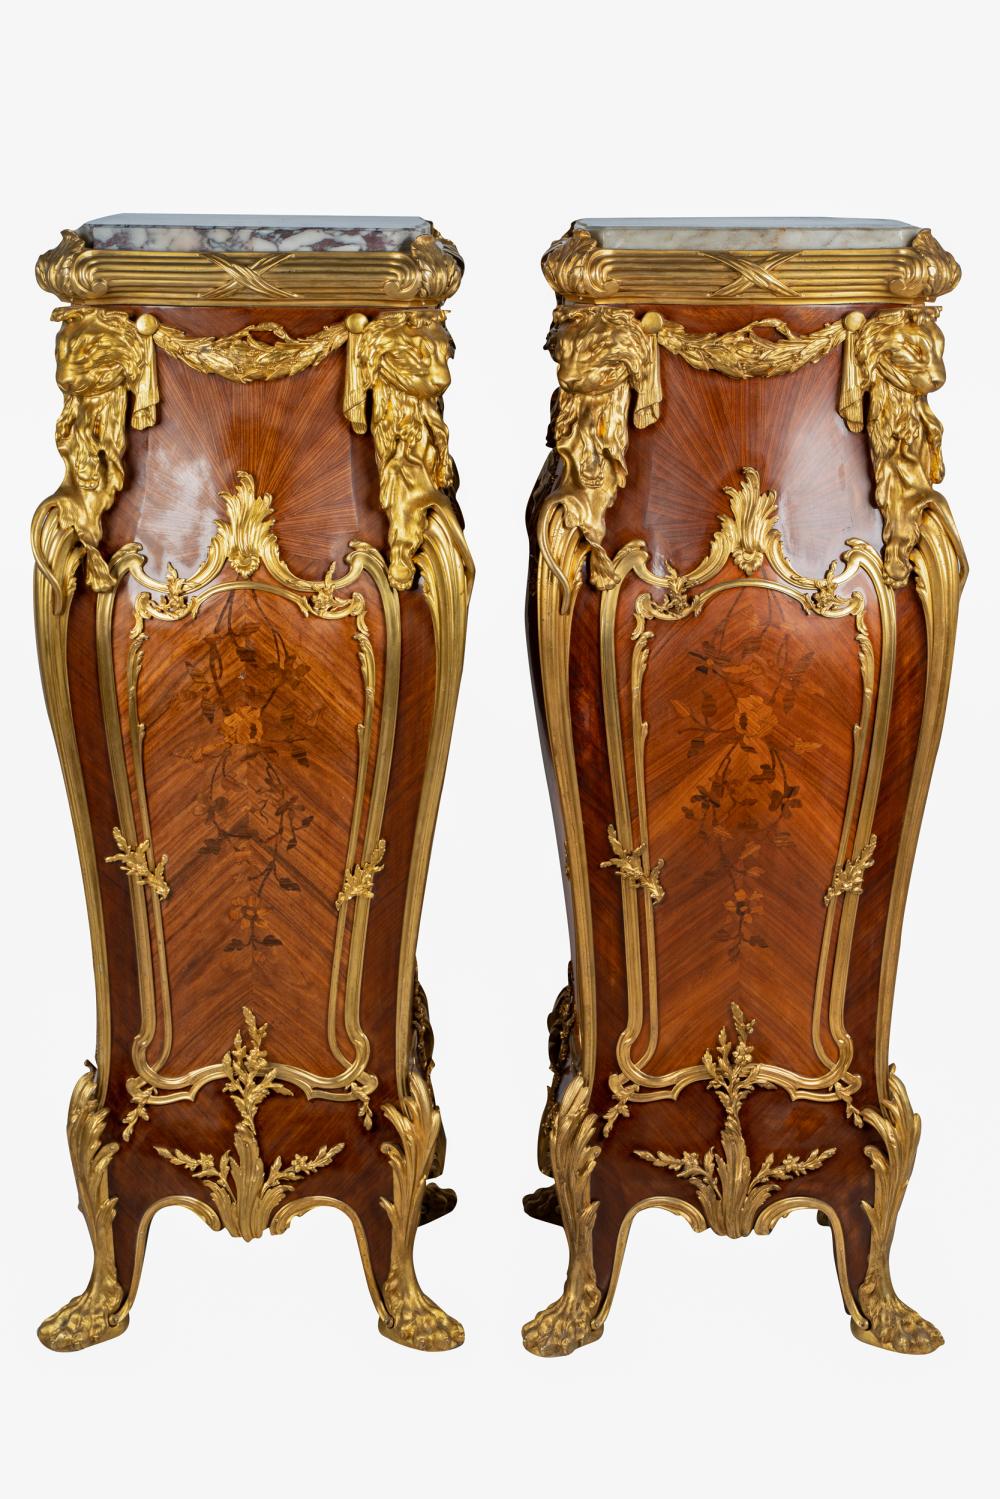 PAIR OF LOUIS XV STYLE GILT BRONZE MOUNTED 332a98